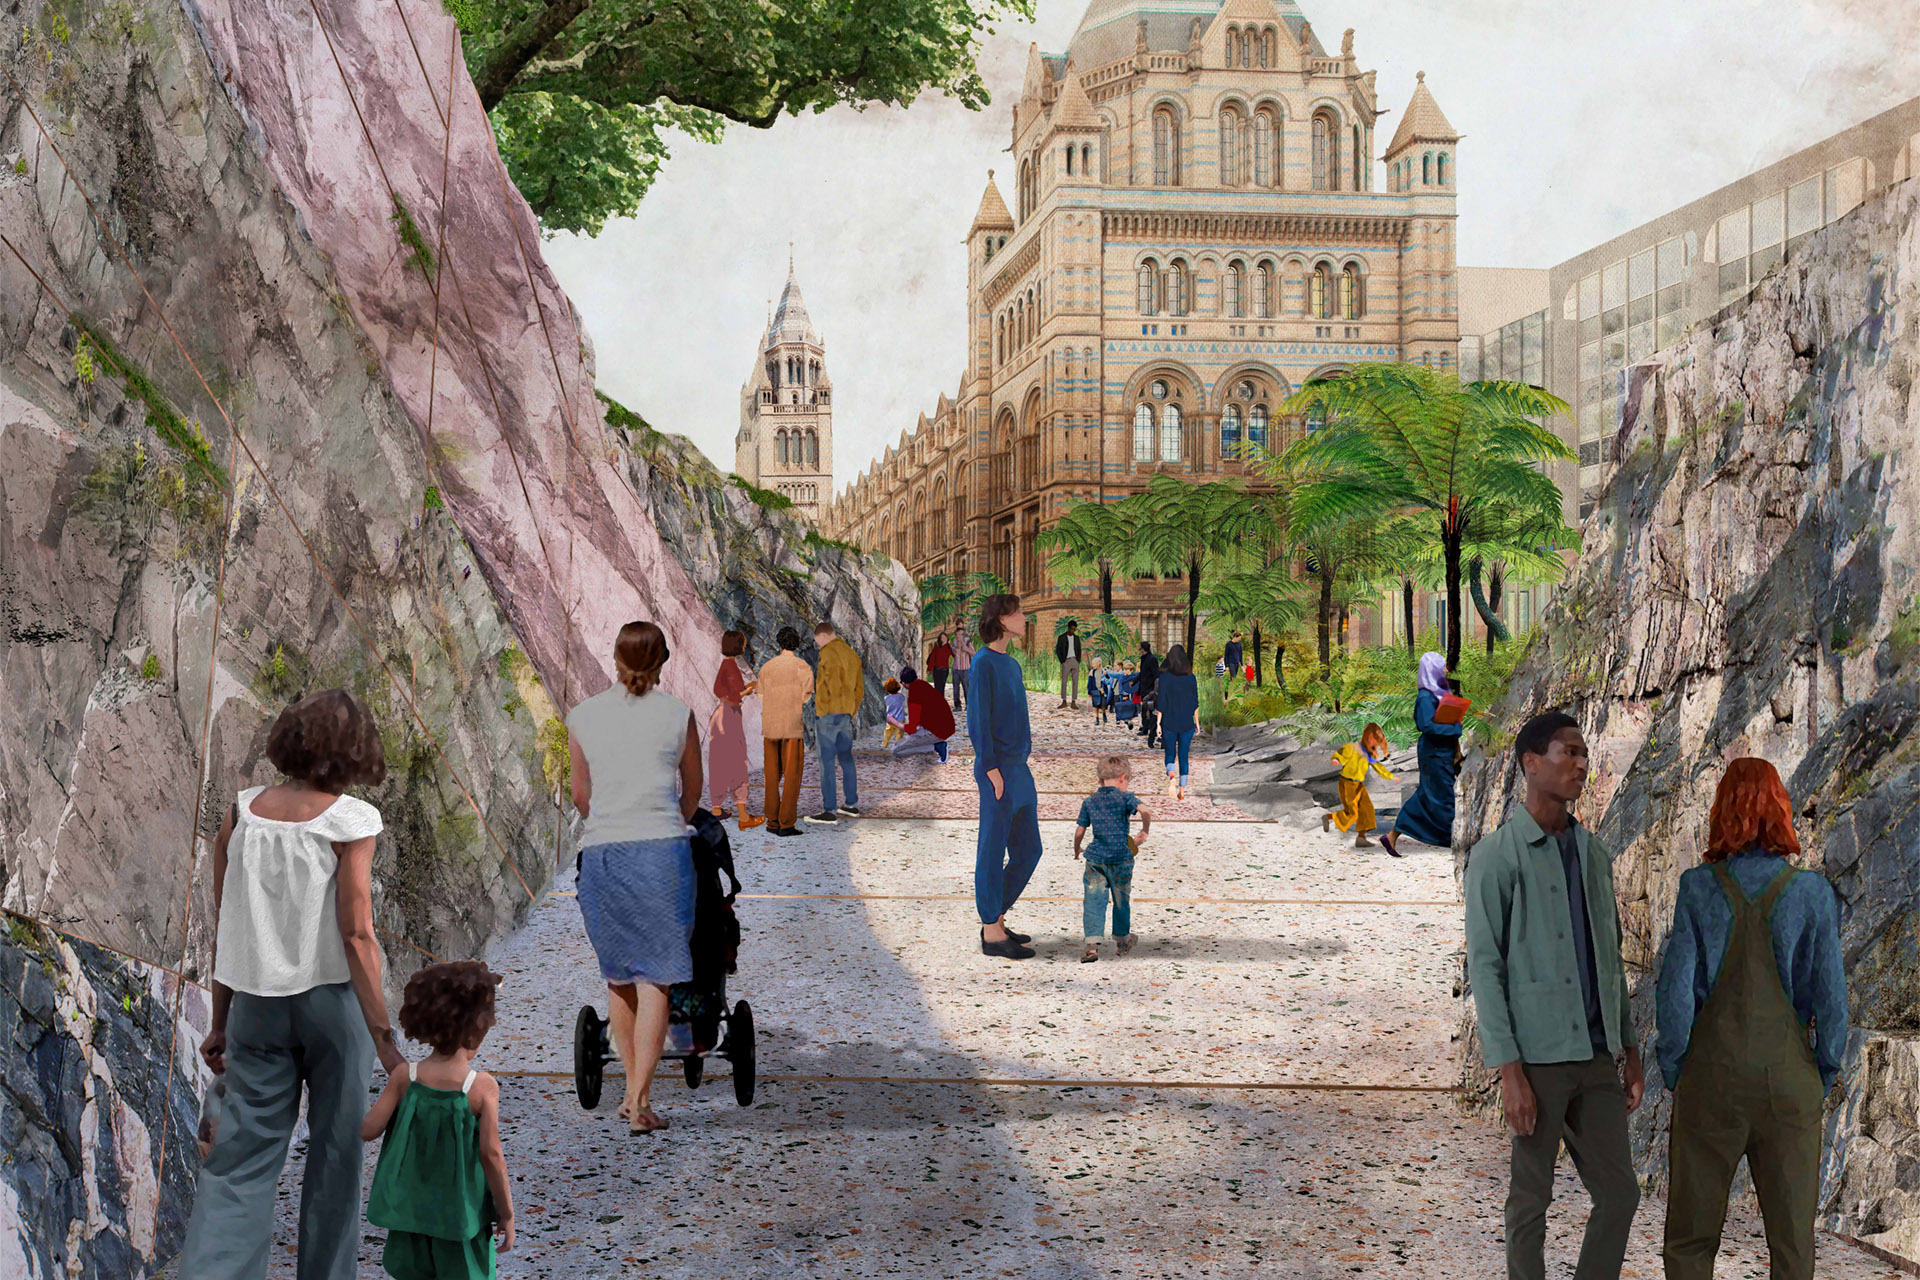 Our first inspirational urban greening project: Natural History Museum’s Urban Nature Project